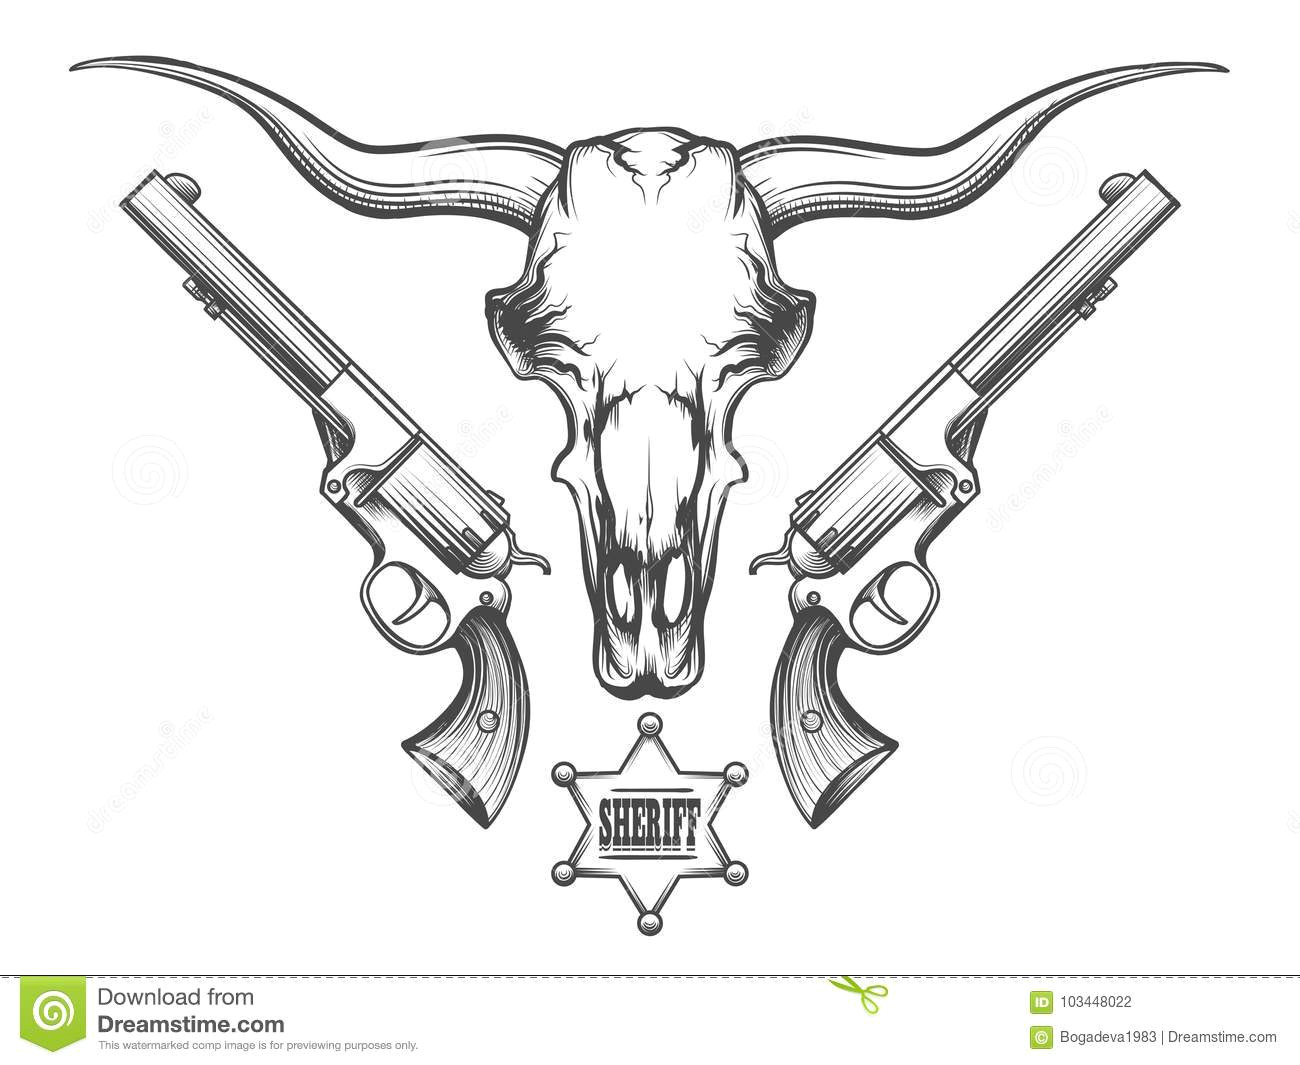 bison skull with pair of revolvers and sheriff badge drawn in engraving style vector illustration